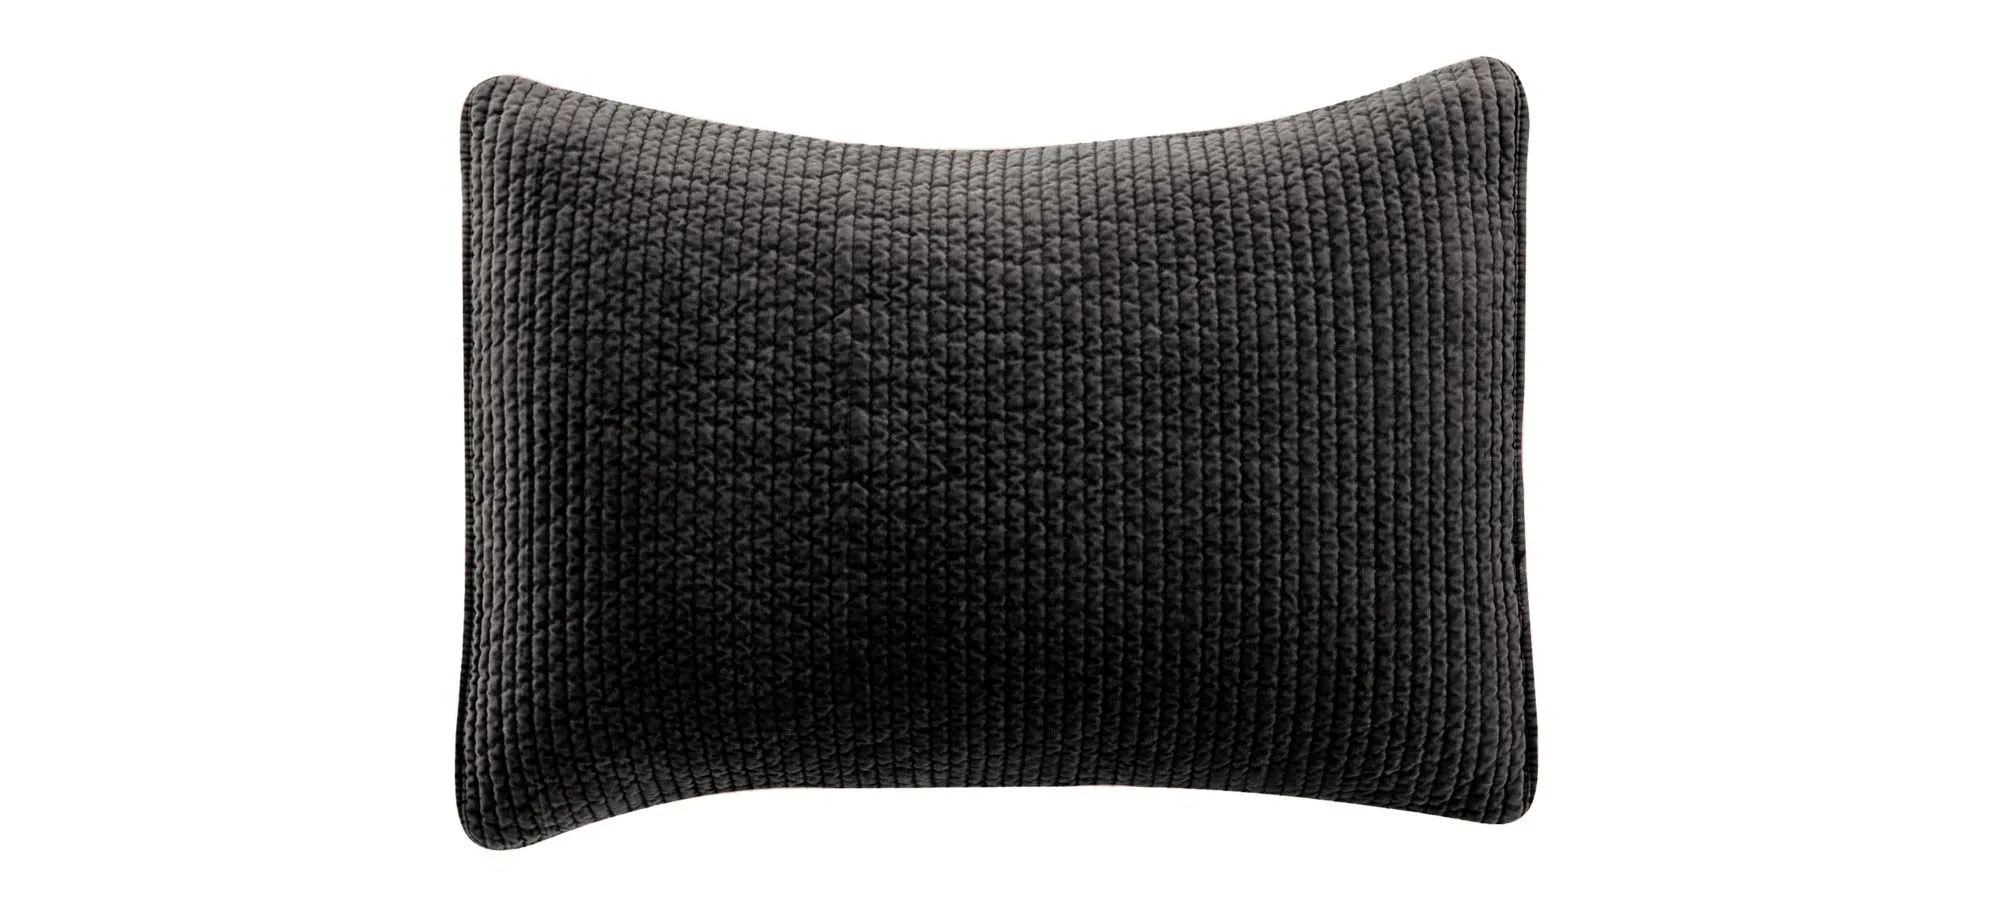 Stonewashed Cotton Velvet Quilted Pillow Sham in Black by HiEnd Accents